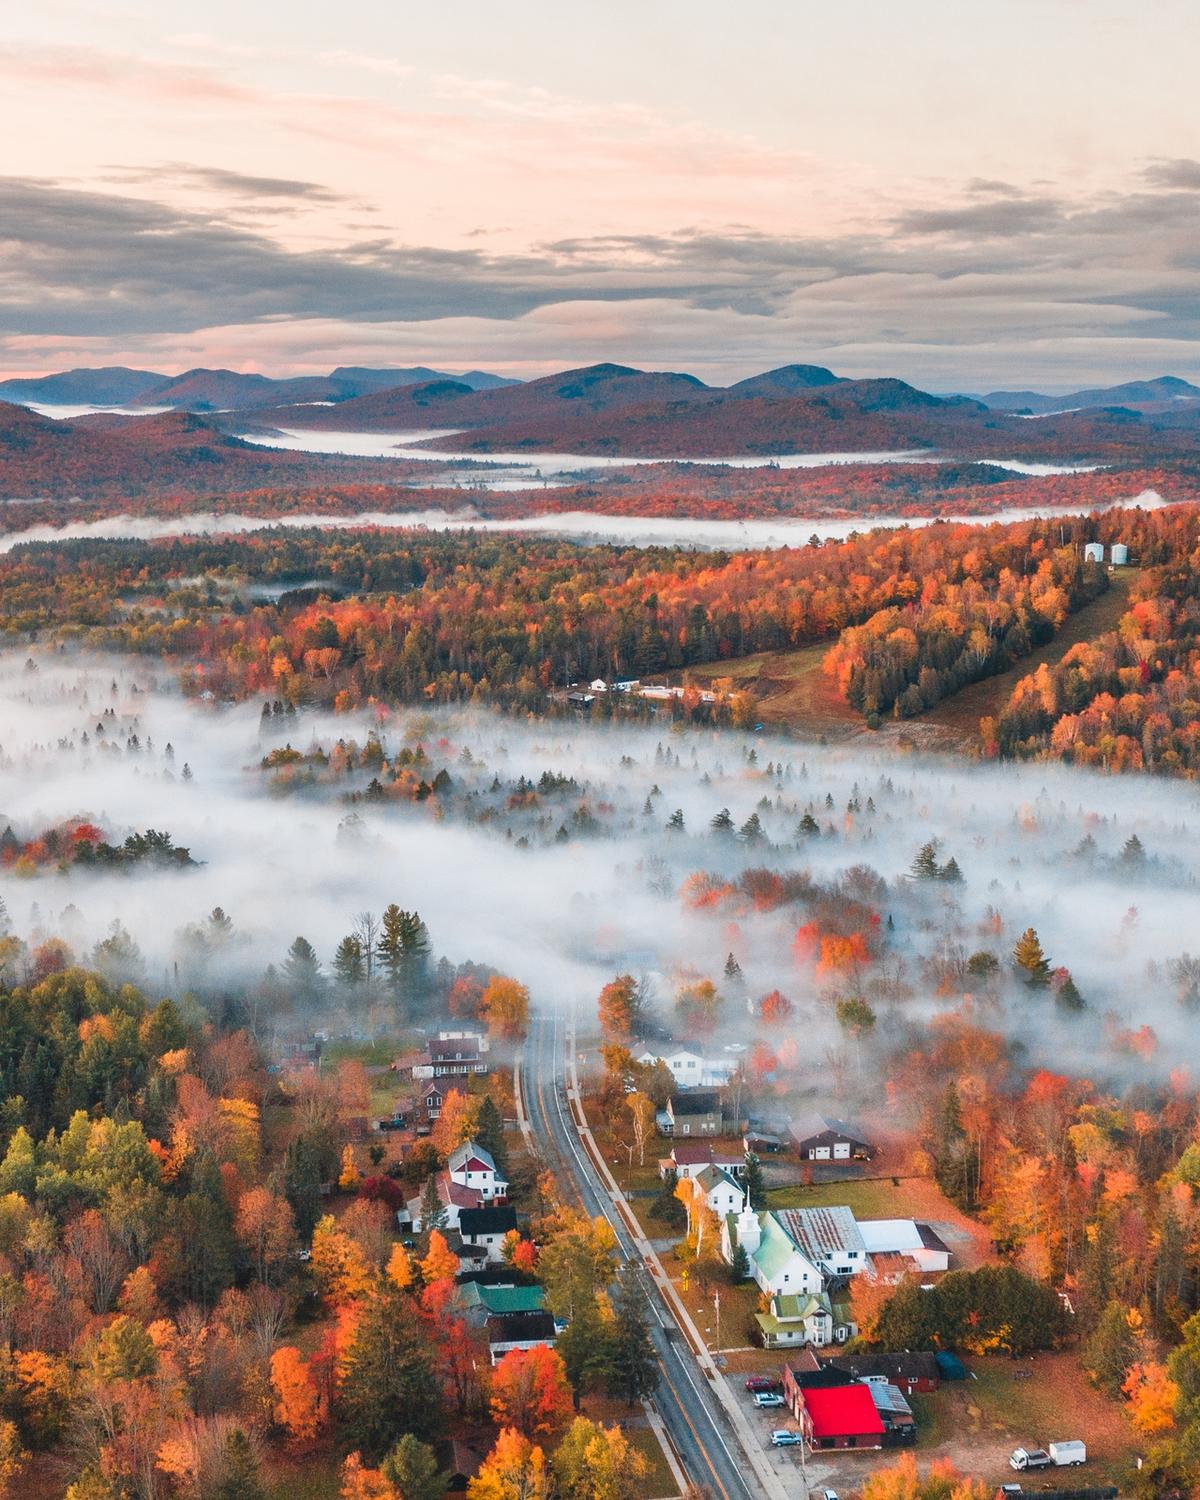 Low fog over a city in the Adirondacks in the Autumn